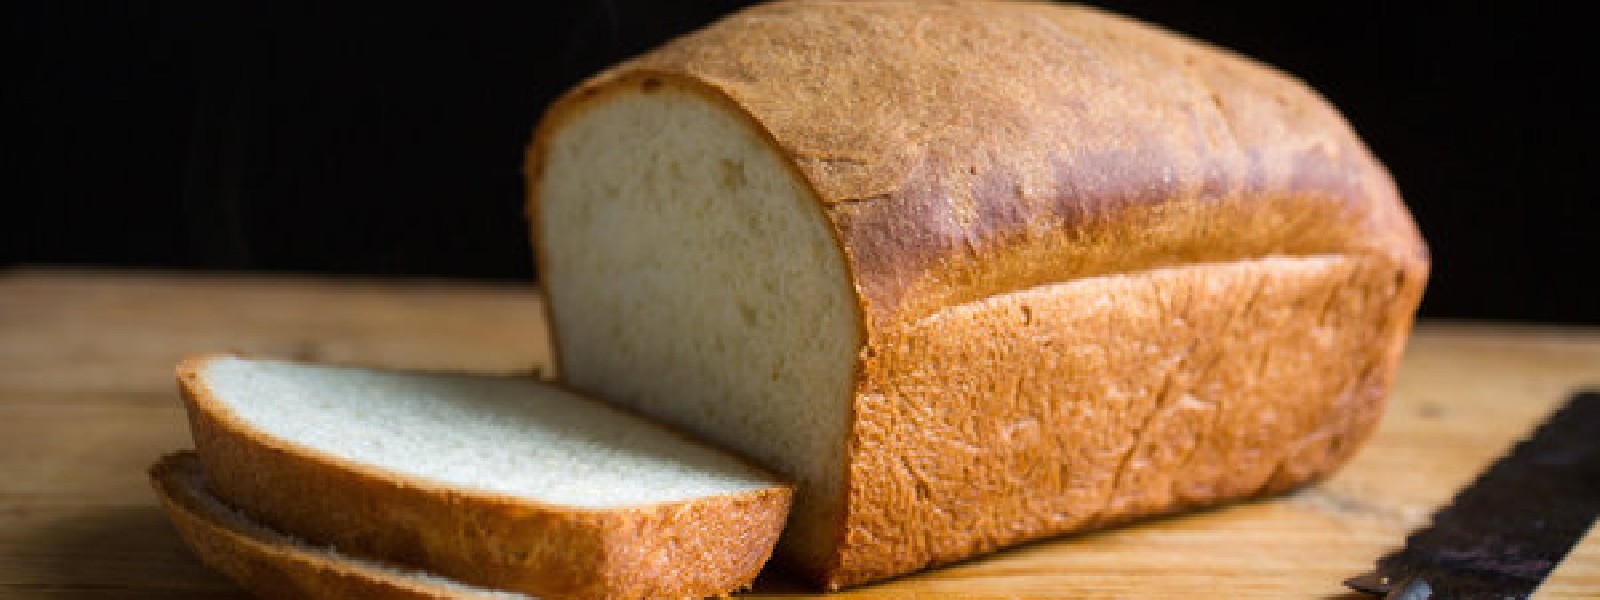 Sri Lanka: Bakery owners decide against increasing bread prices